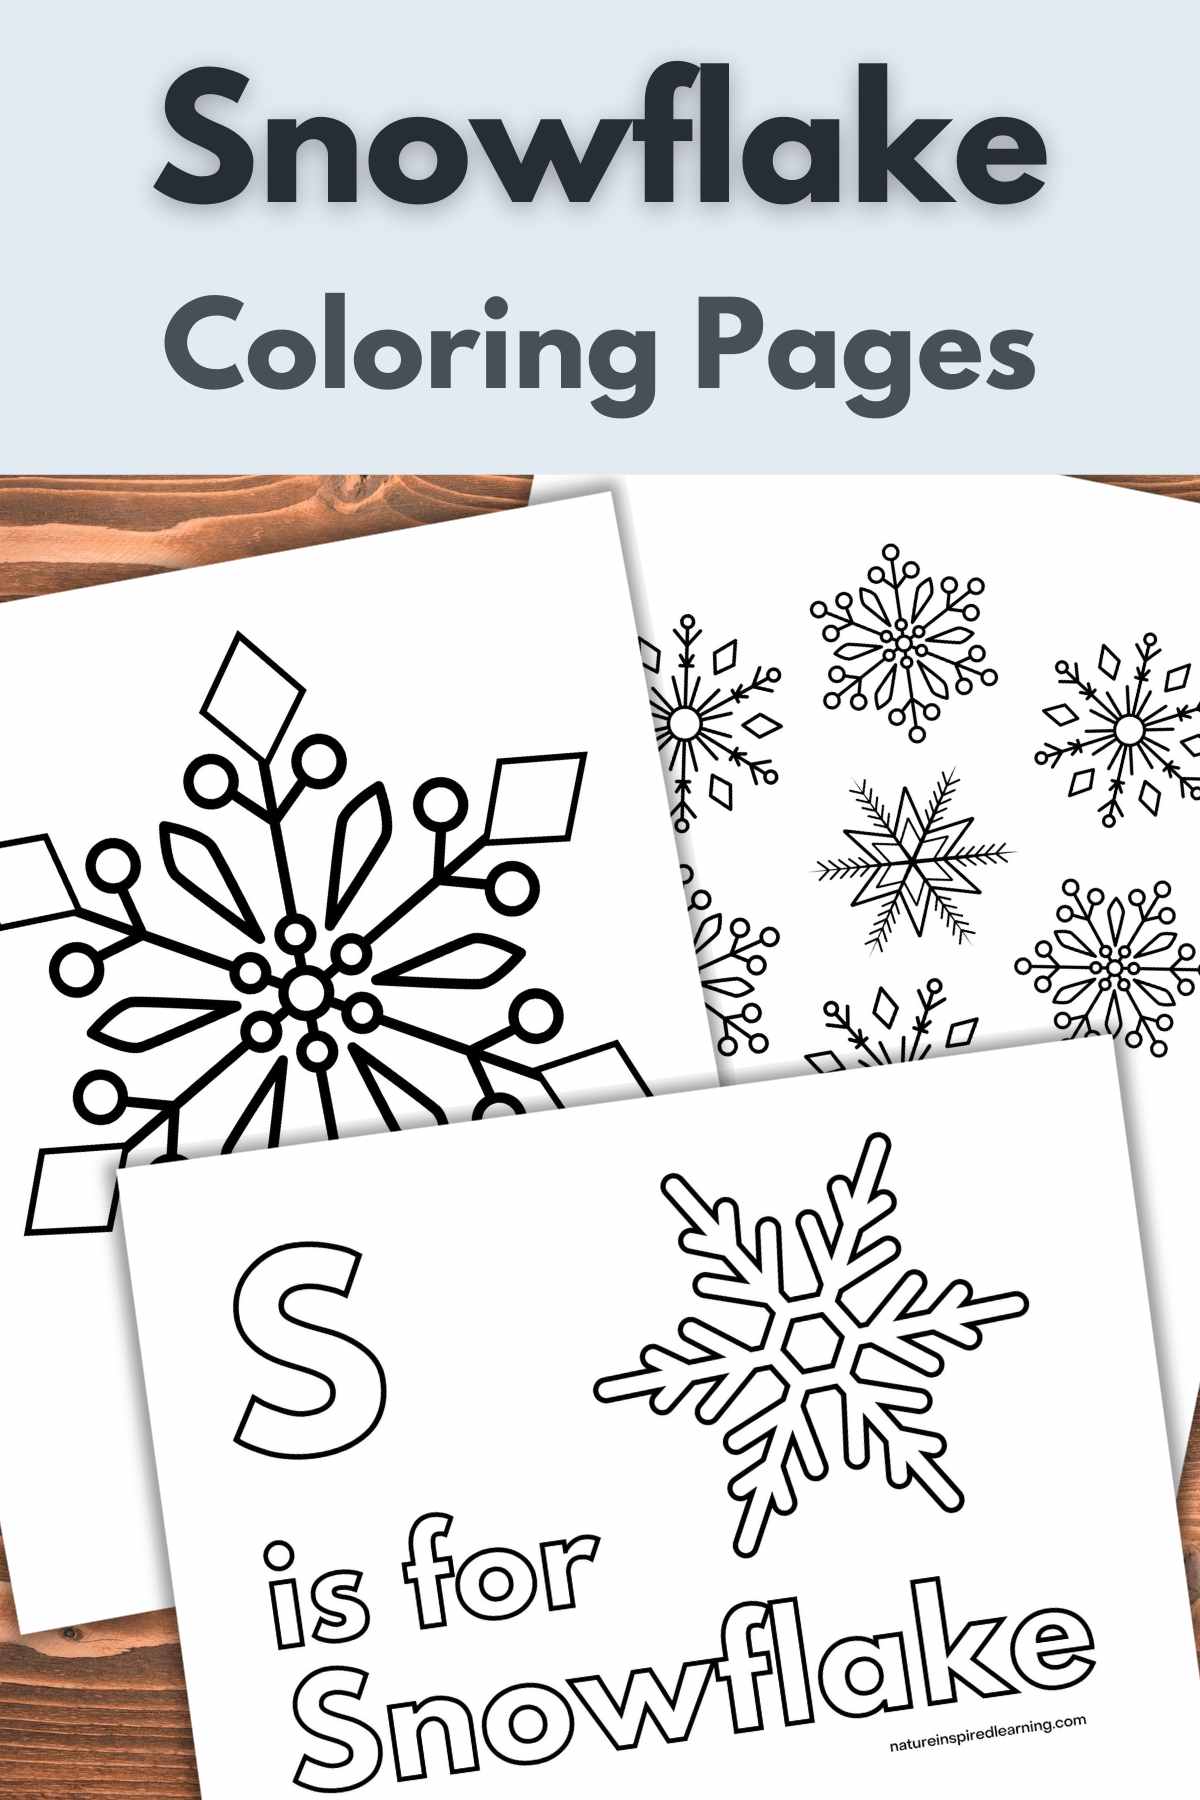 Three overlapping snowflake coloring pages on a wooden background with the words Snowflake Coloring Pages in black on a light blue background across the top.